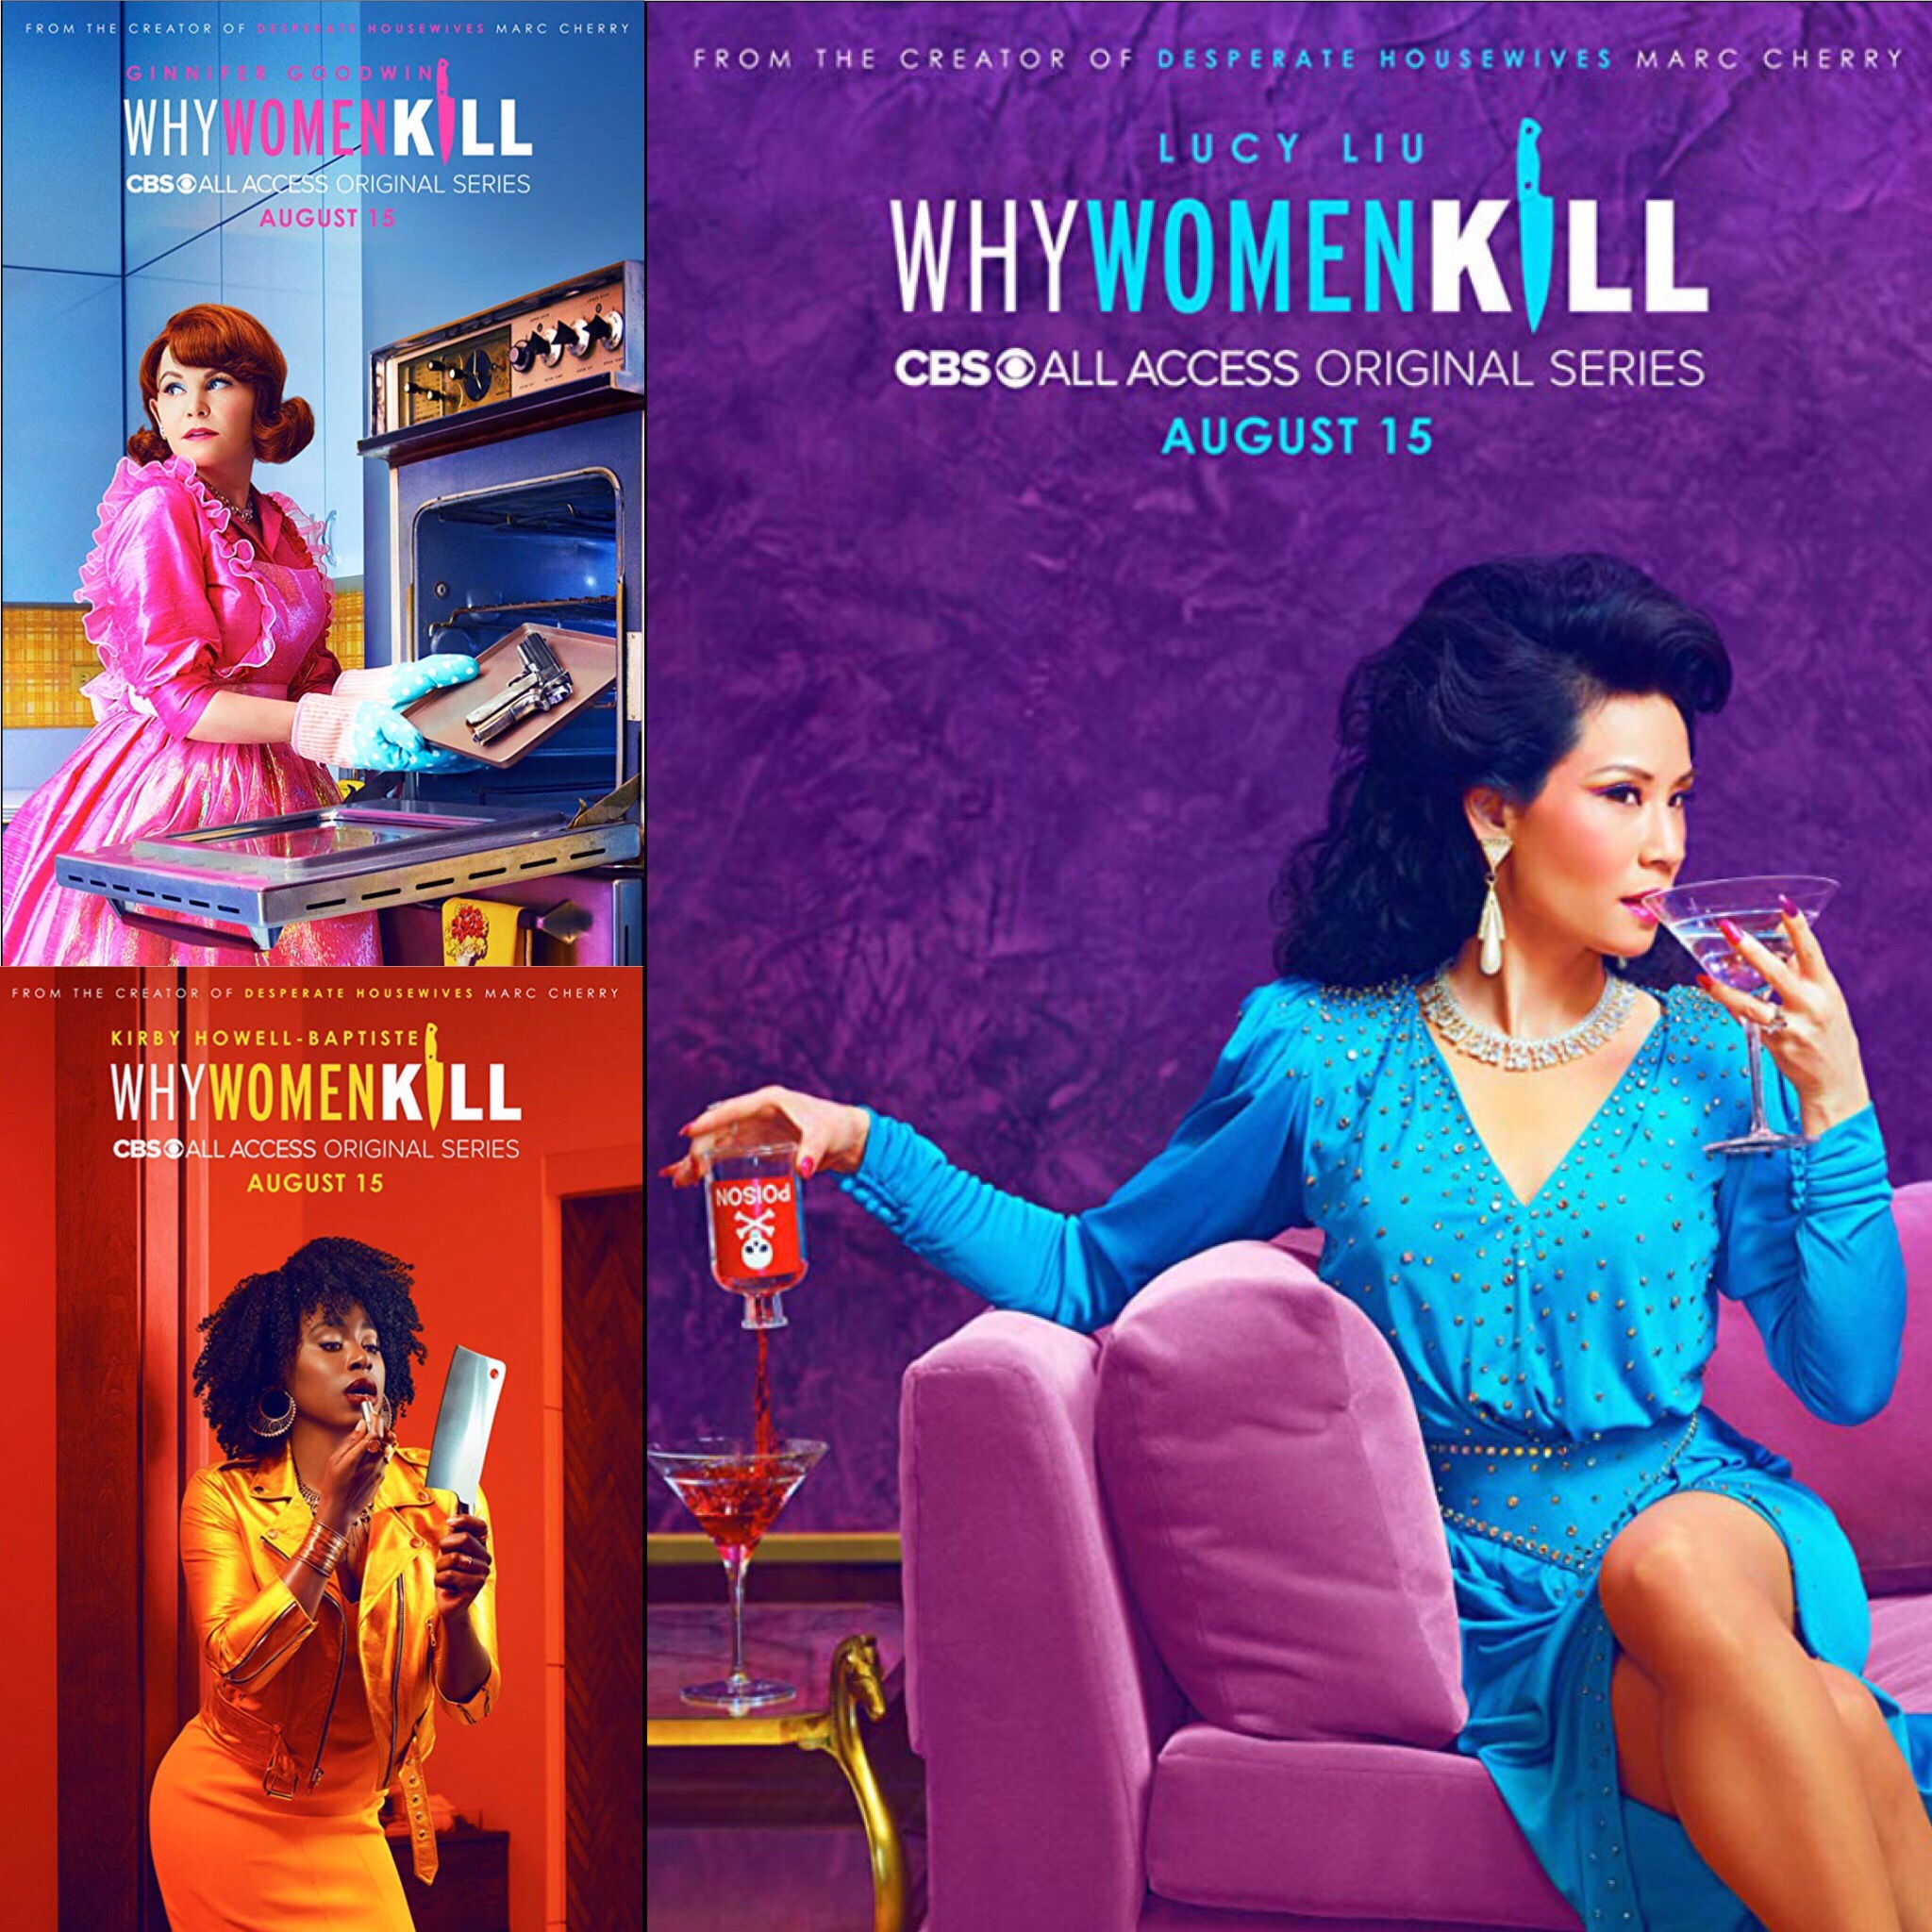 TV Review: 'Why Women Kill' on CBS All Access